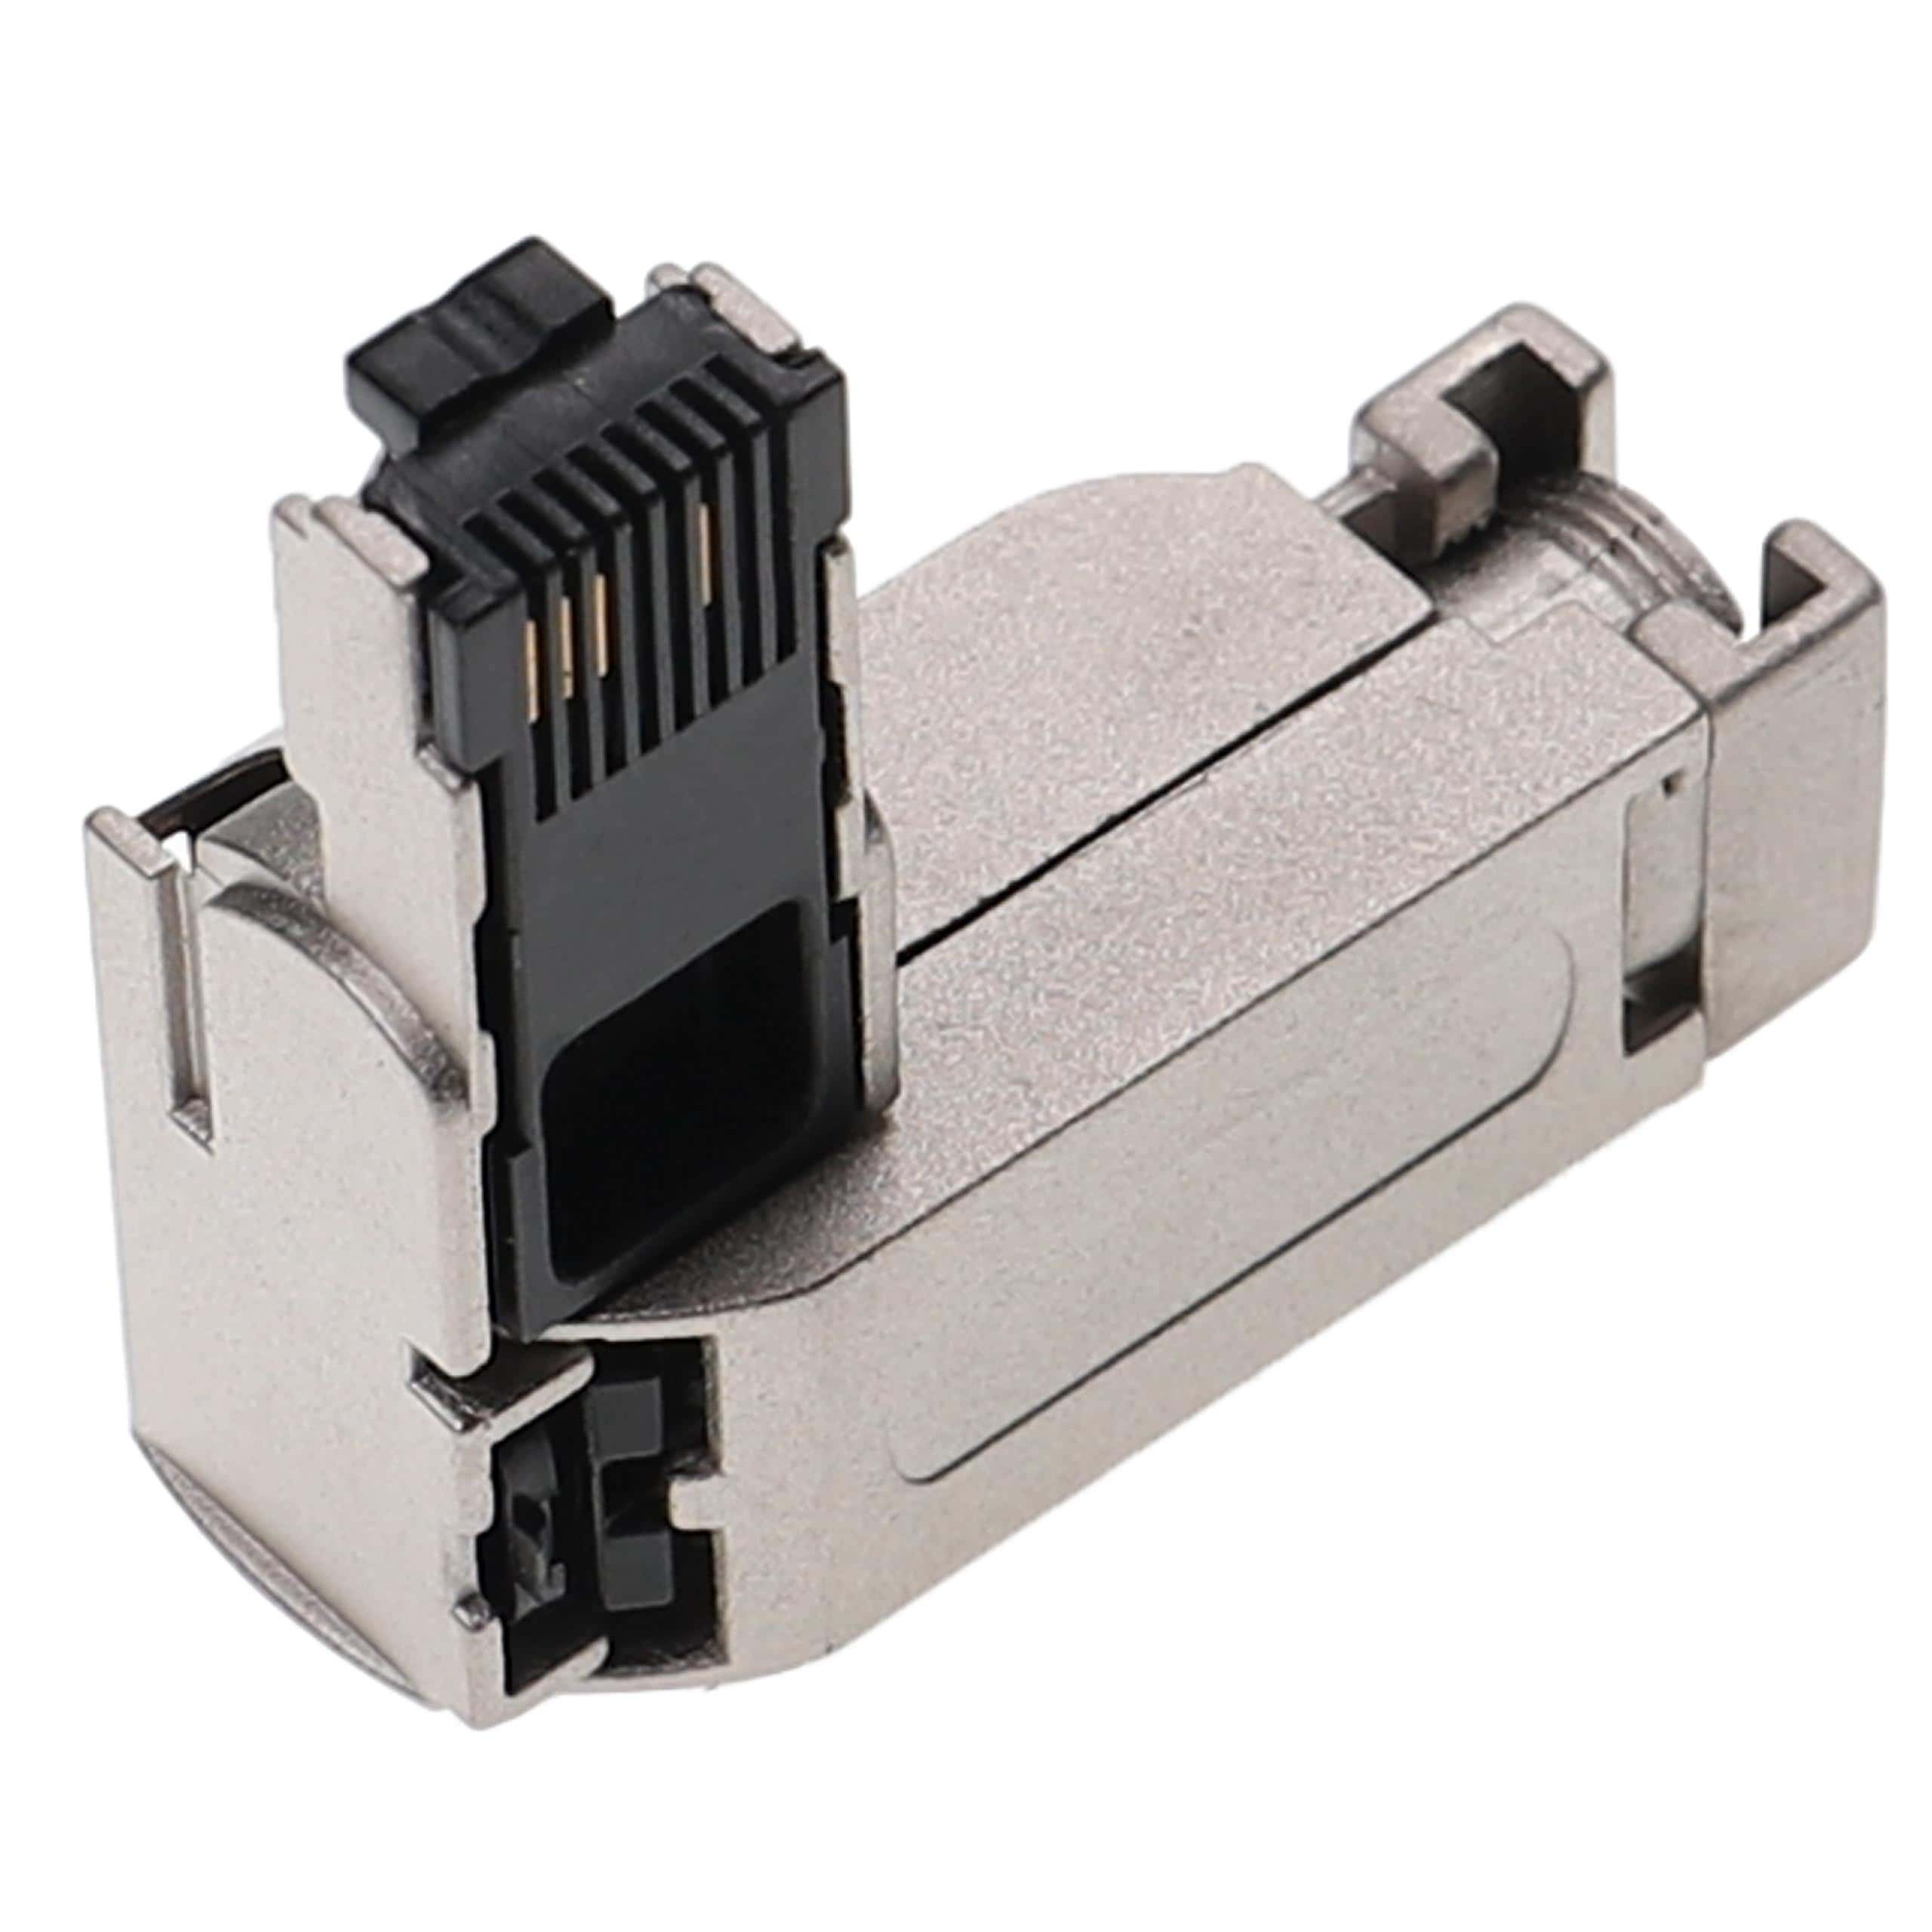 RJ45 Plug as Replacement for Siemens Profinet 6GK1901-1BB10-2AA0 Ethernet Cable - Connector Plug, angled